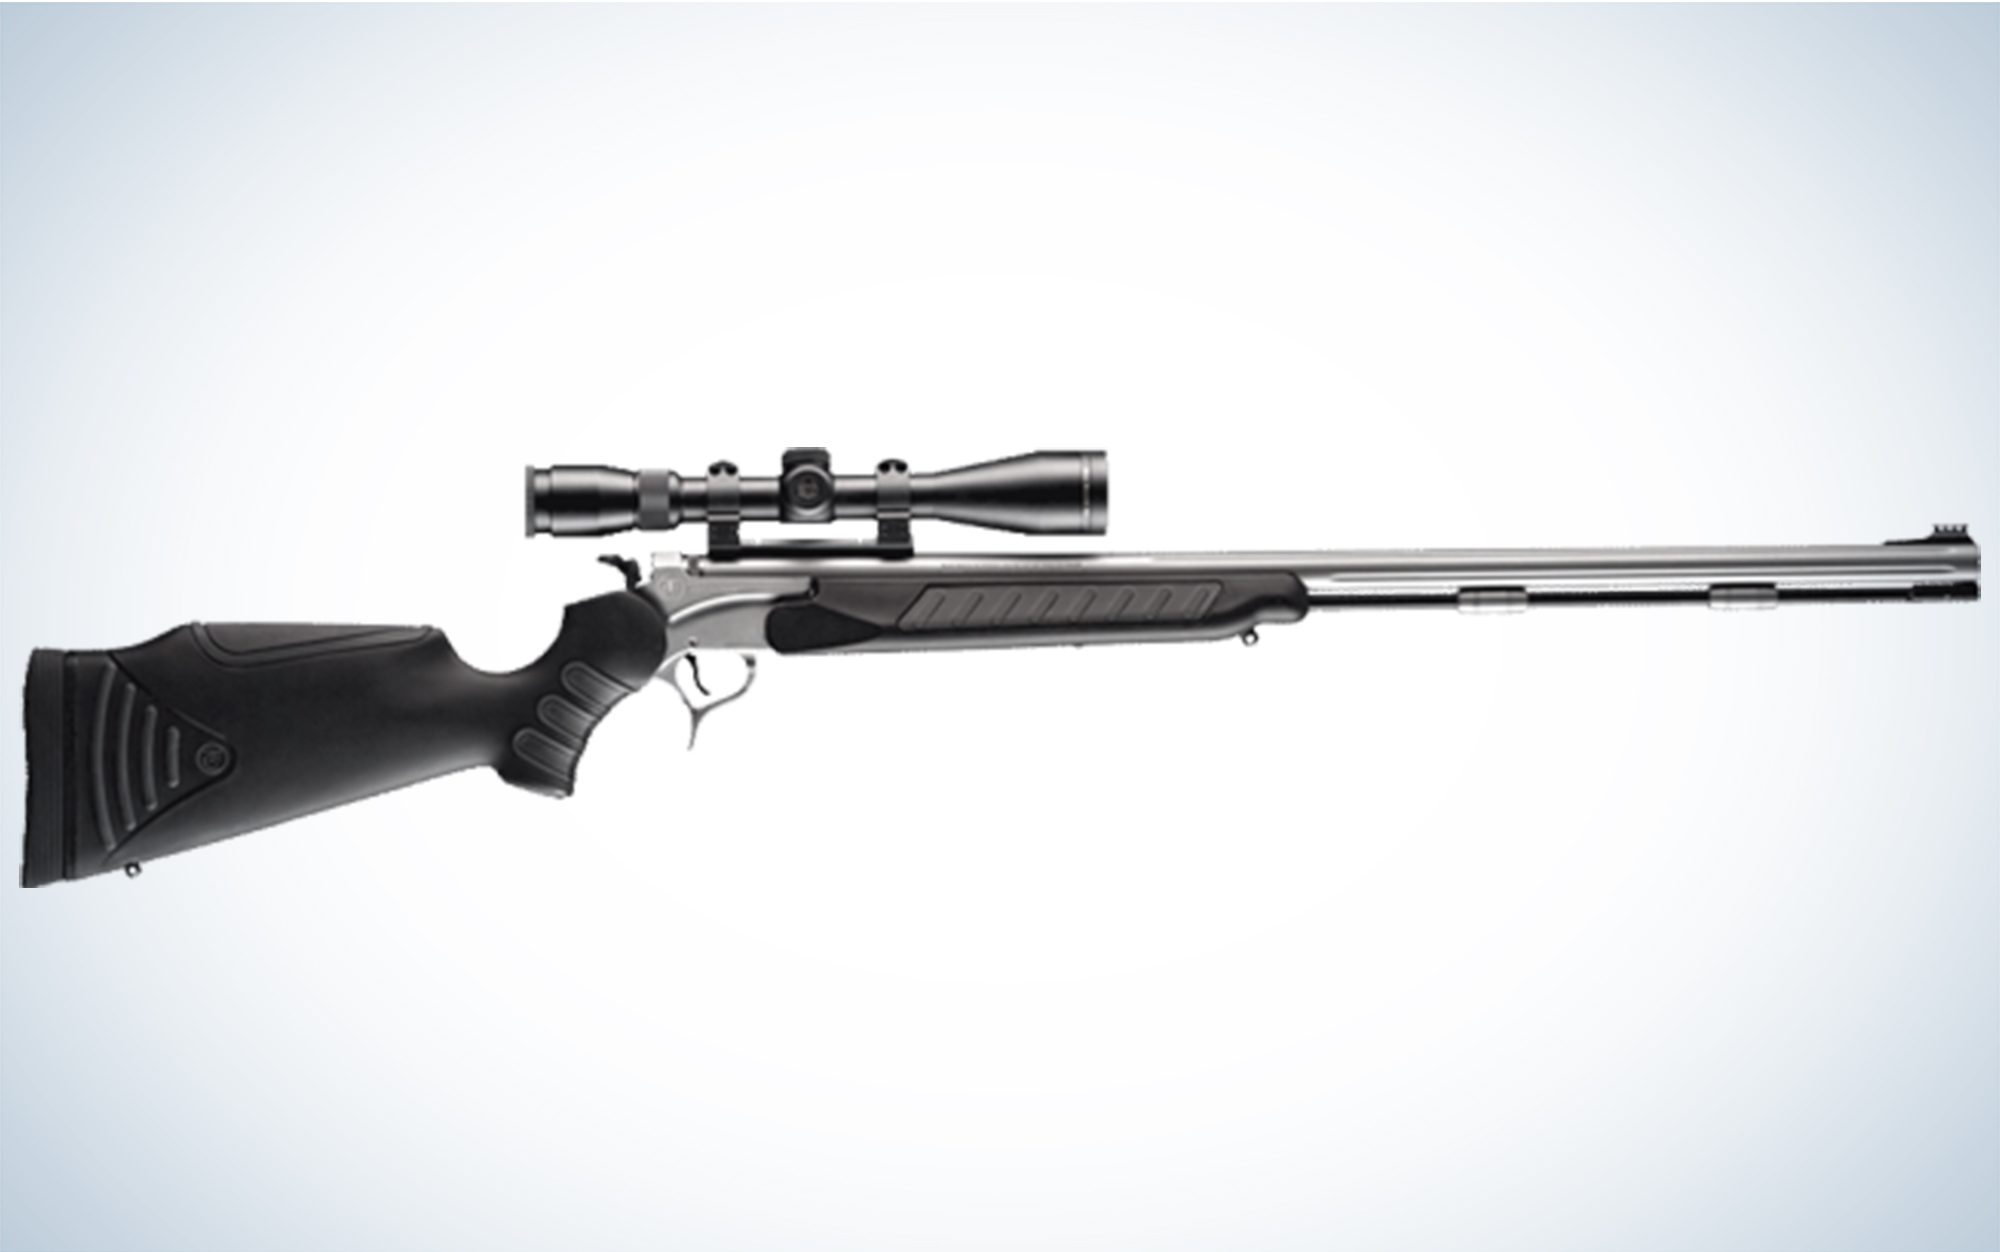 The Thompson Center Encore is available in 12 or 20 gauge.